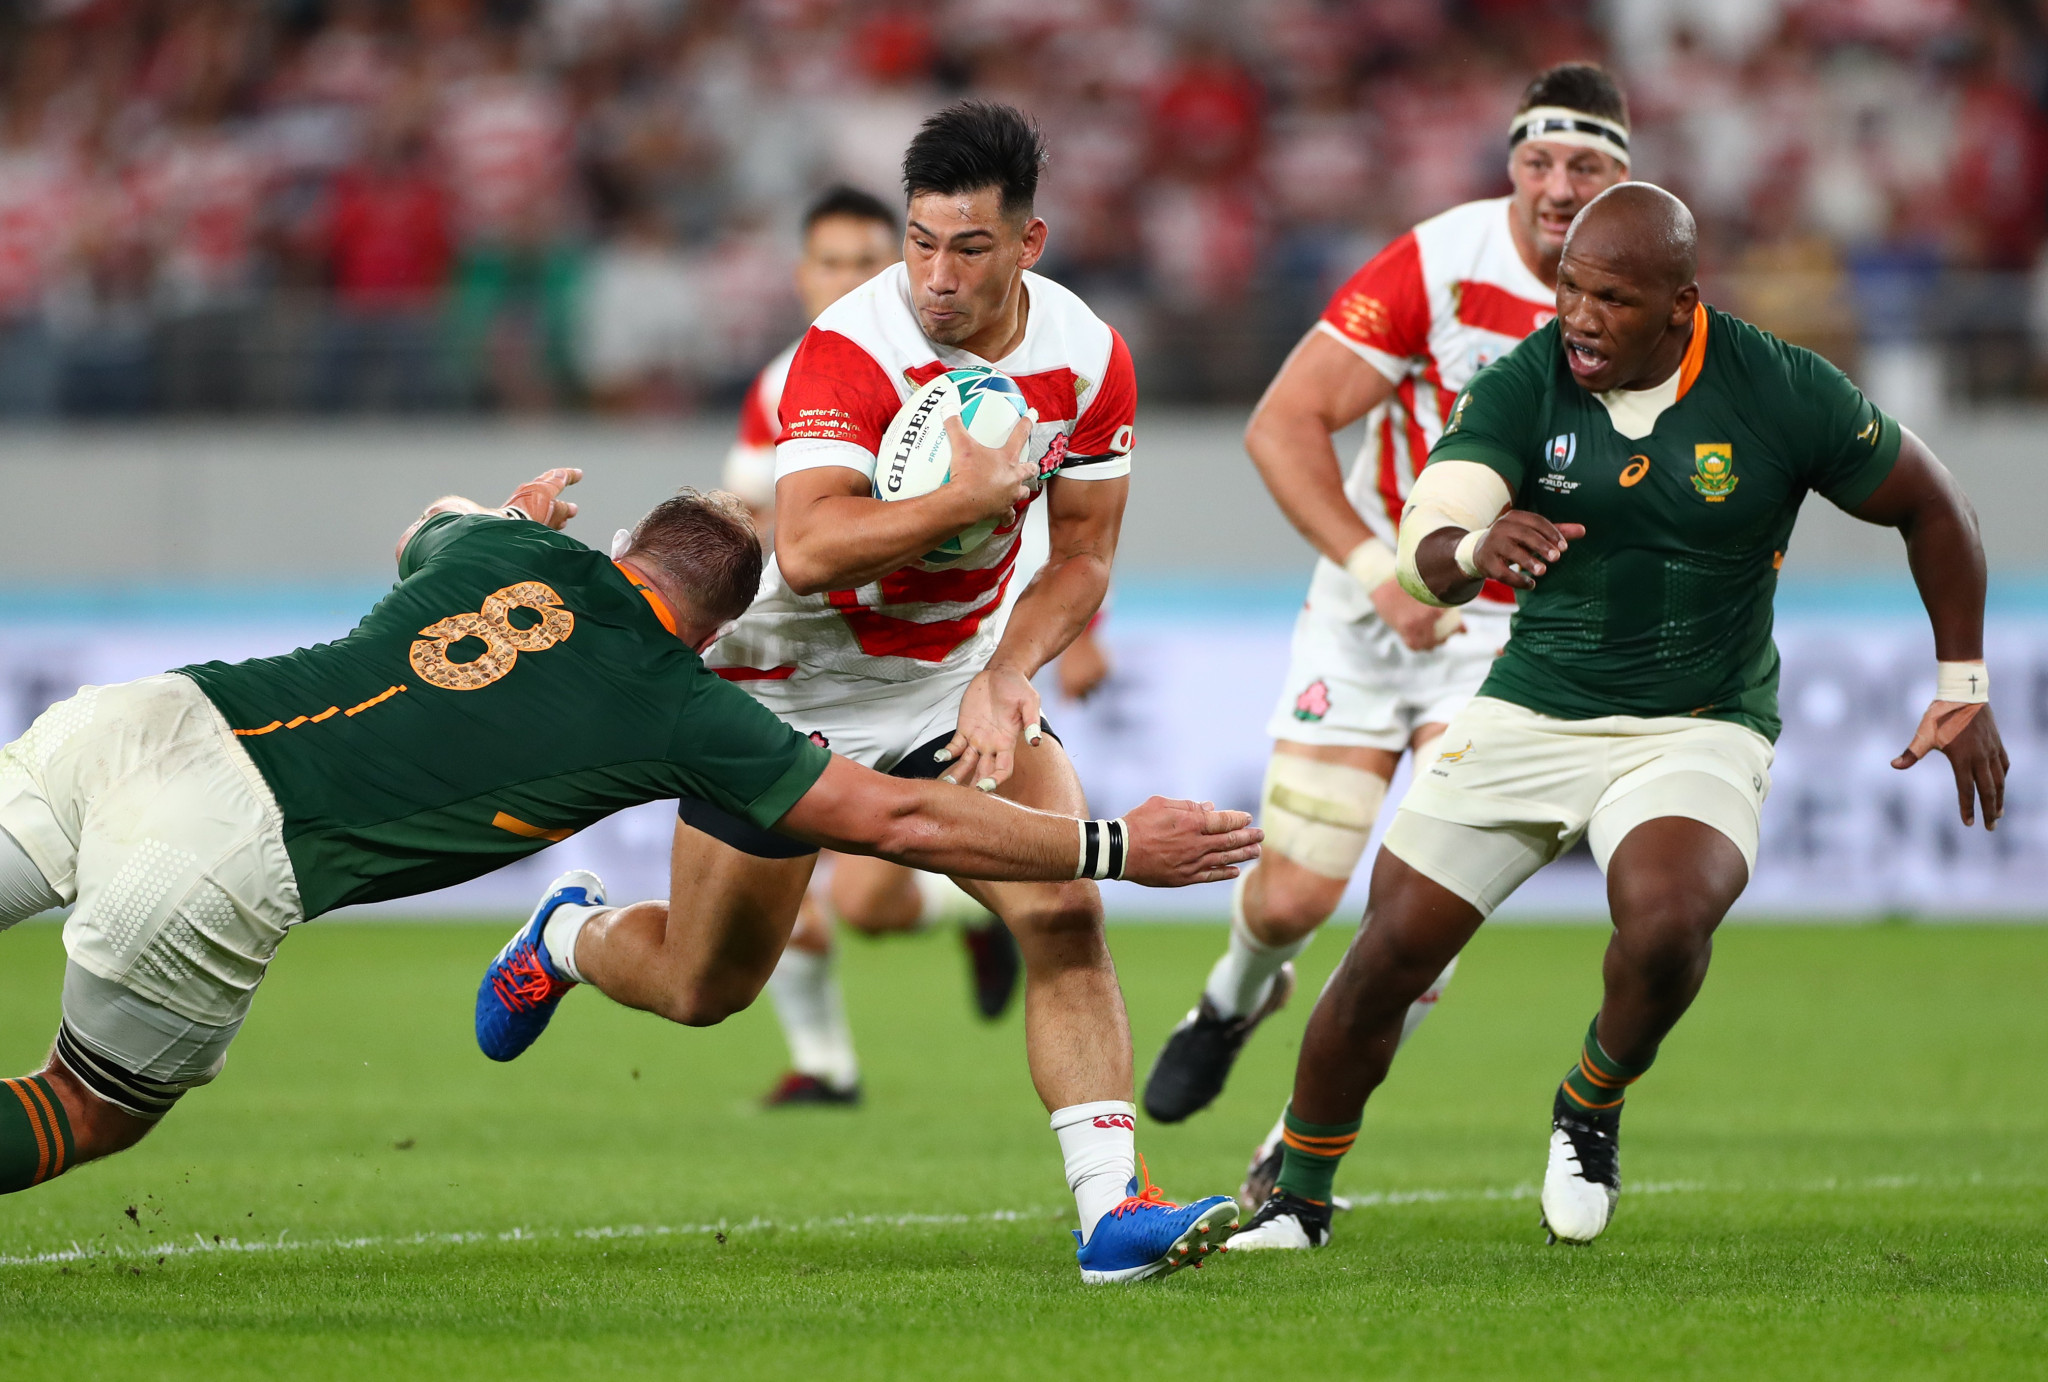 Japan reached the quarter-finals when they hosted the men's Rugby World Cup in 2019 ©Getty Images